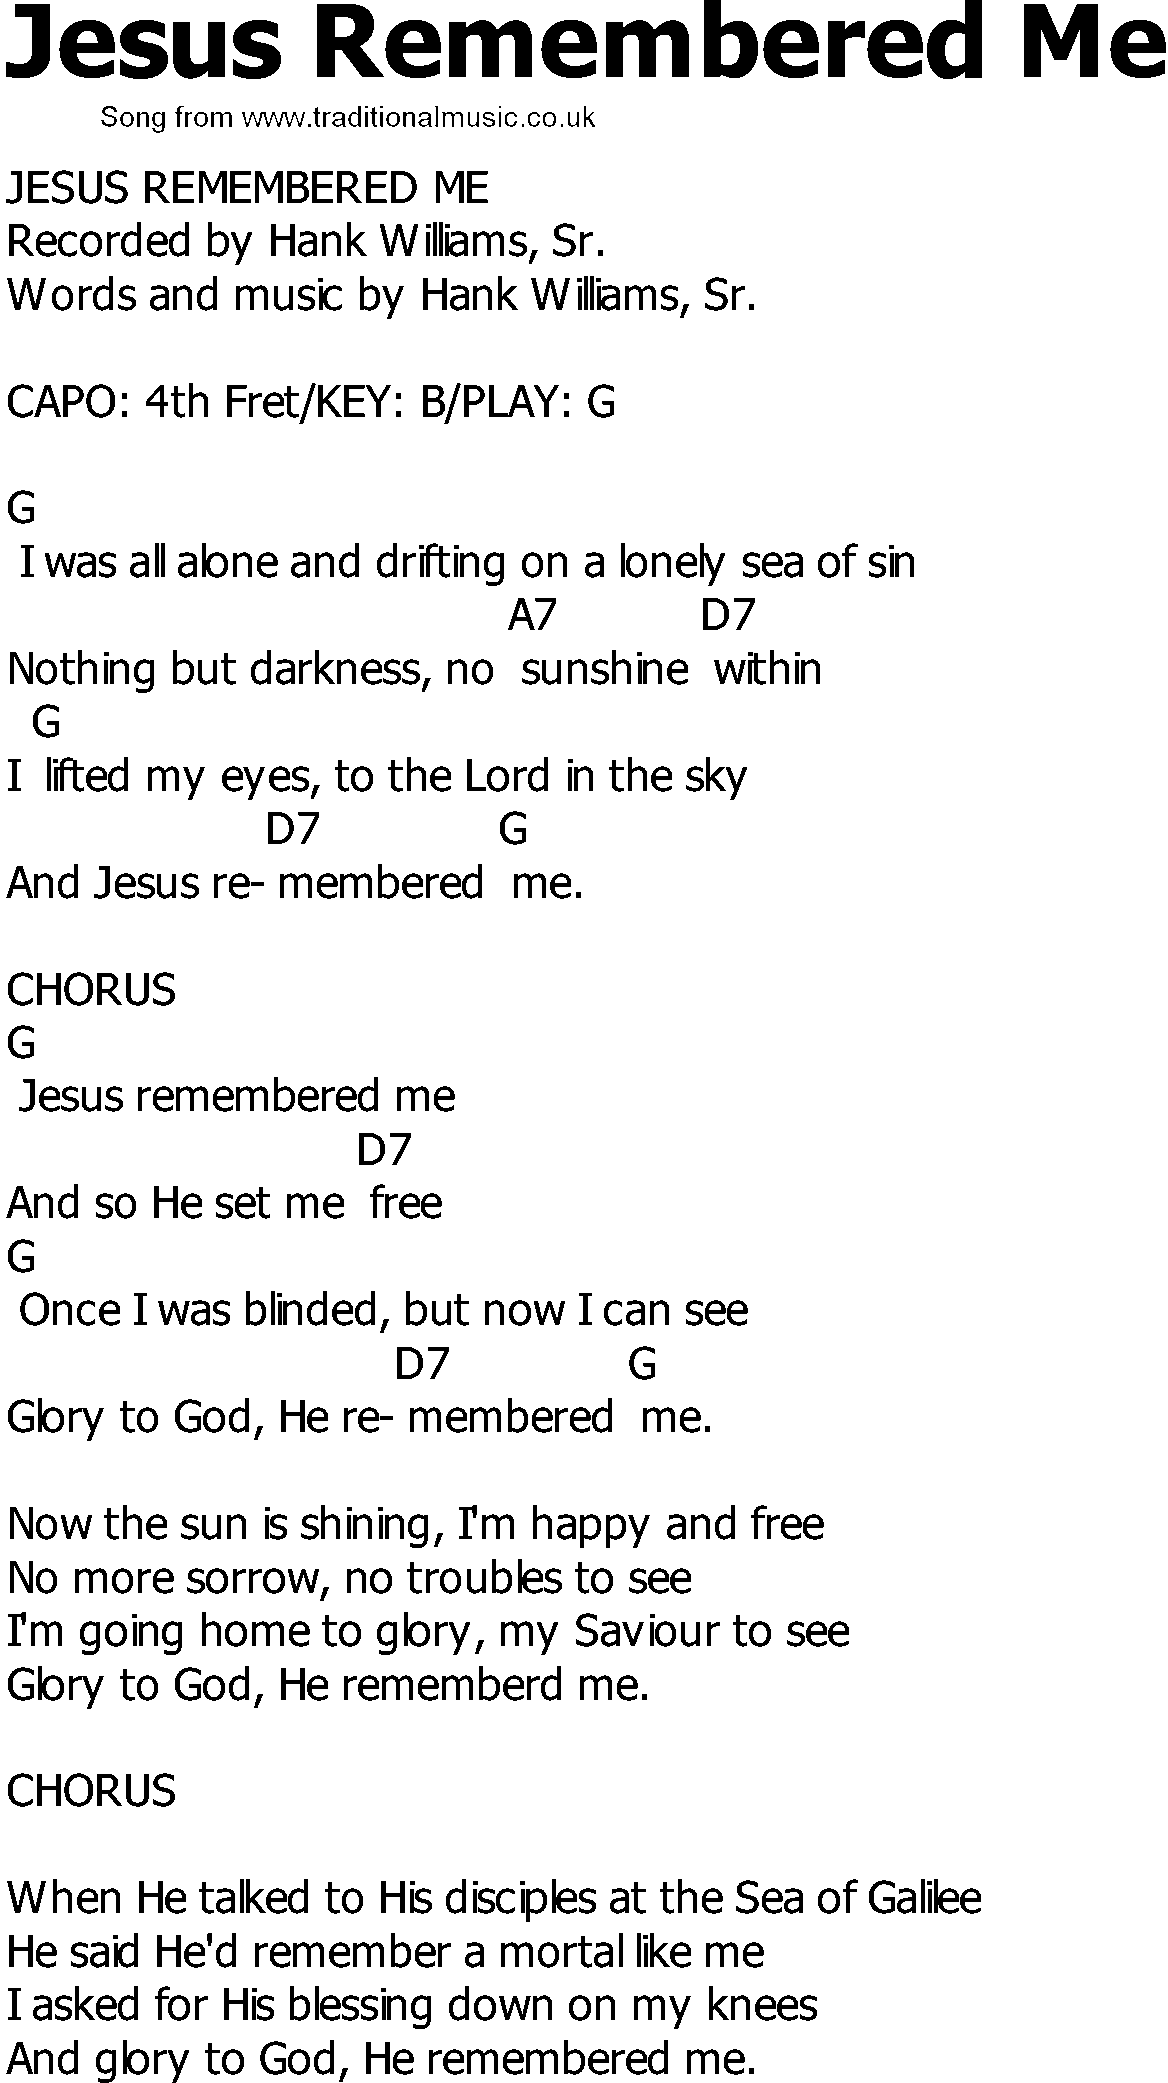 Old Country song lyrics with chords - Jesus Remembered Me